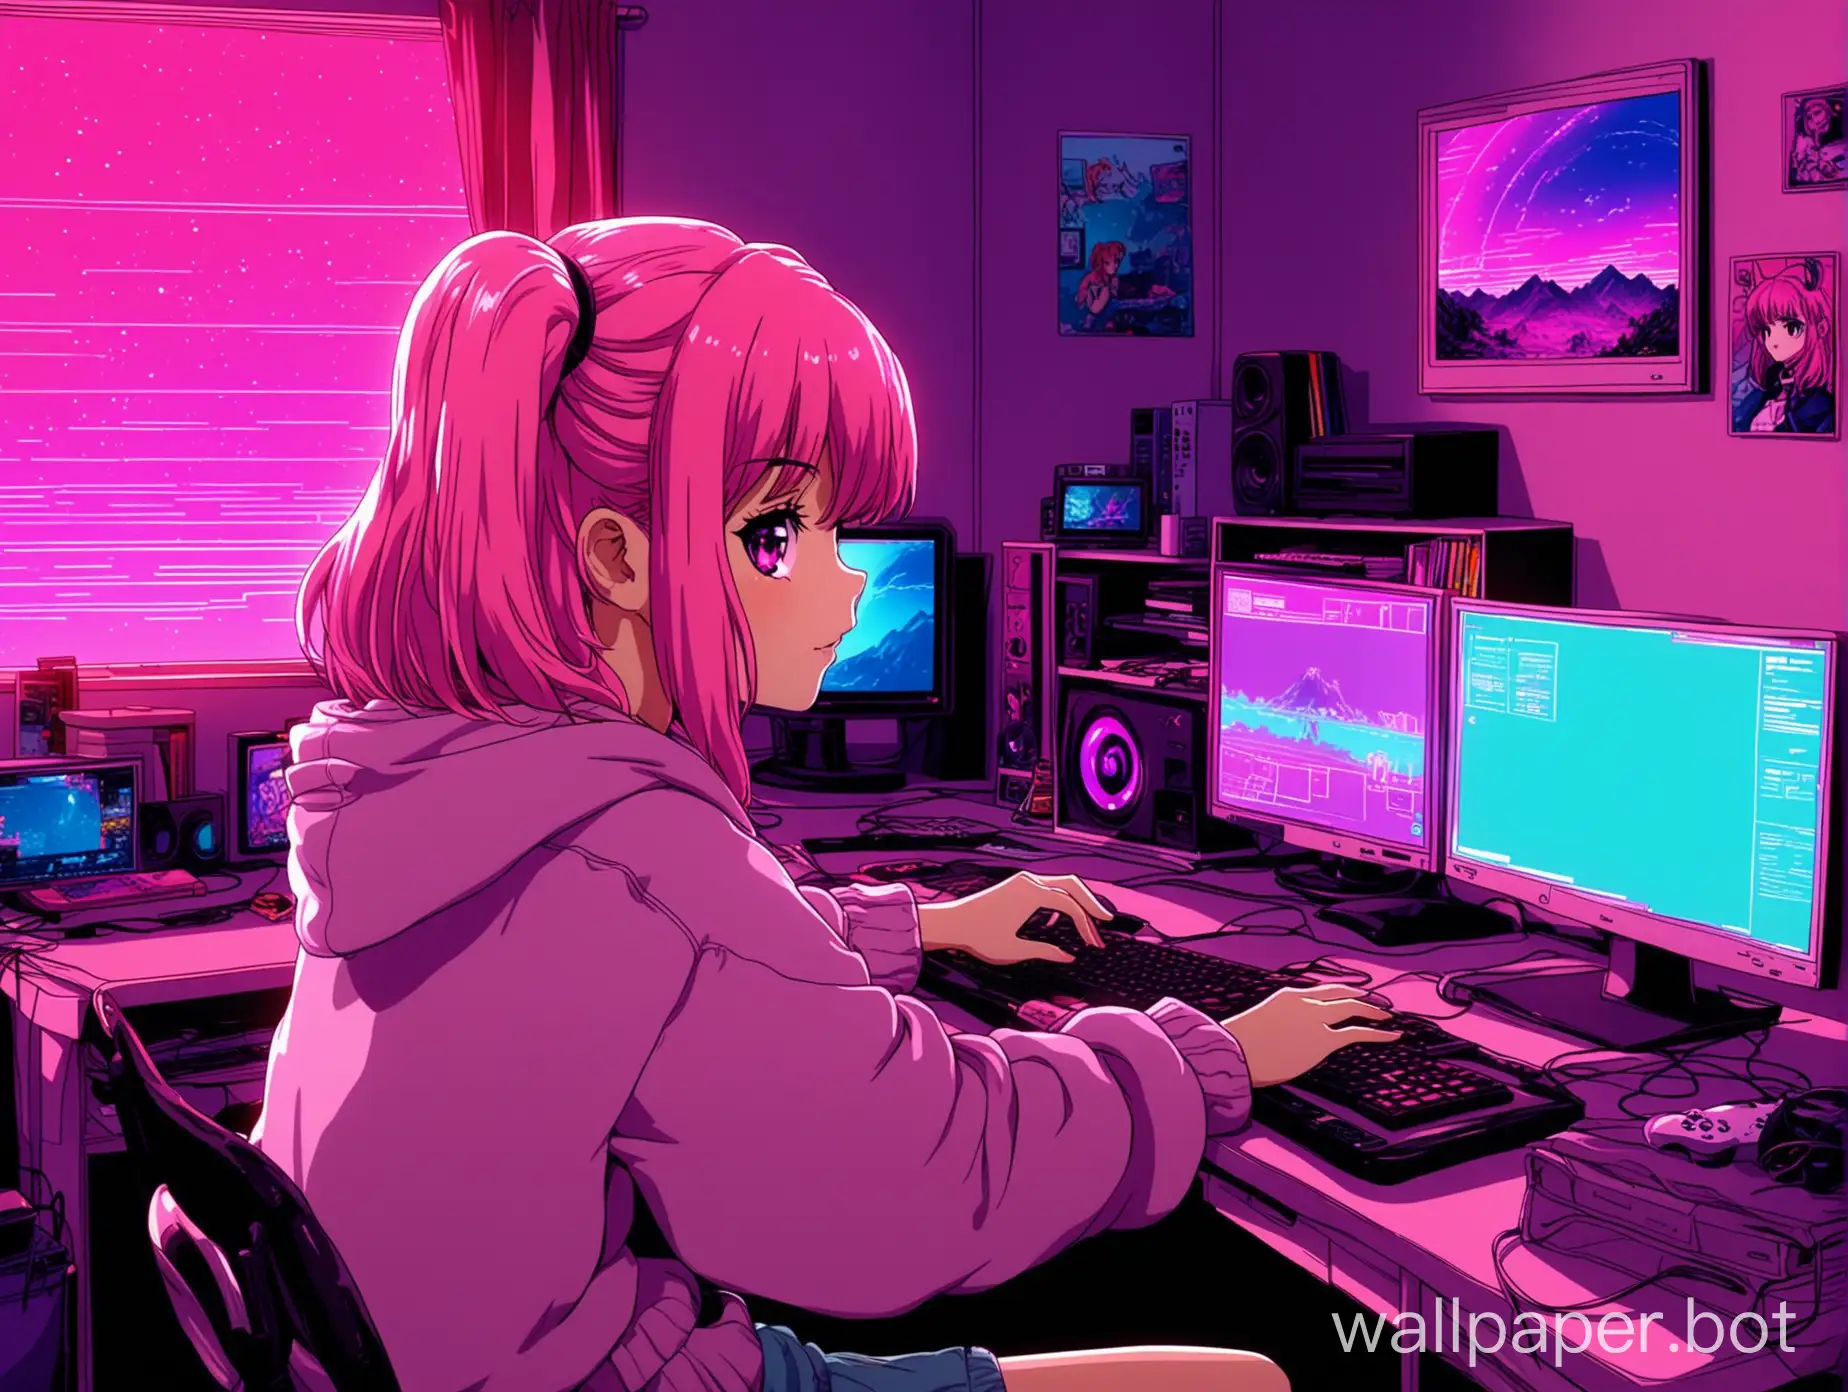 lofi anime girl pink hair drawing at a desk in front of a pc in a cozy room. The room has synthwave colors and video game paraphernalia